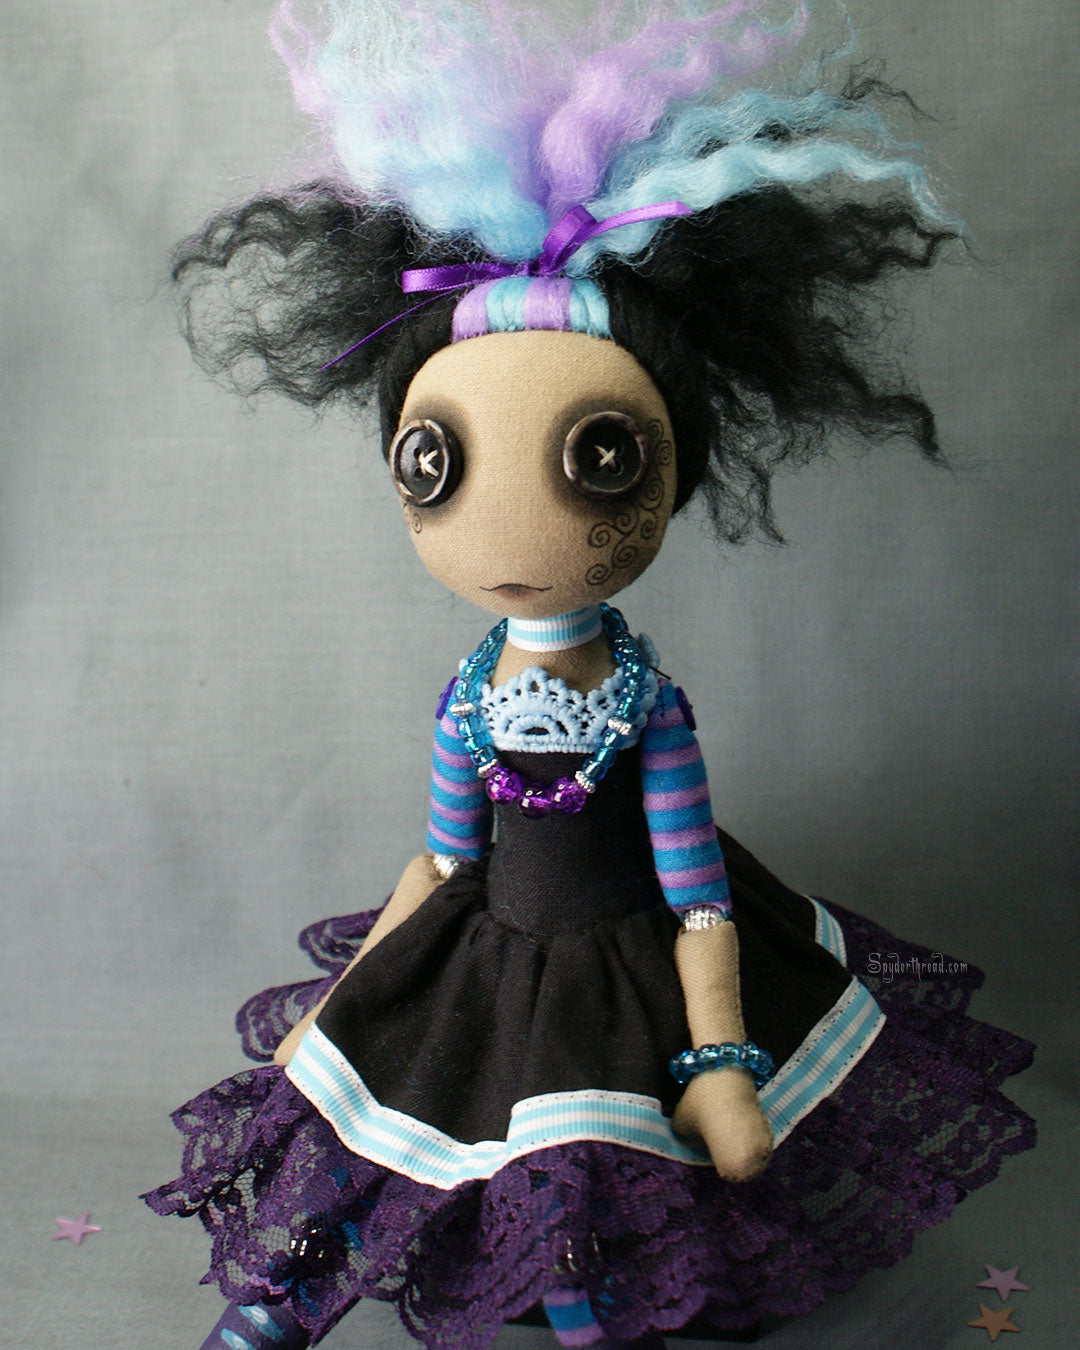 BAME brown skin tone button eyed Gothic style doll in black purple and blue dress with purple lace up boots